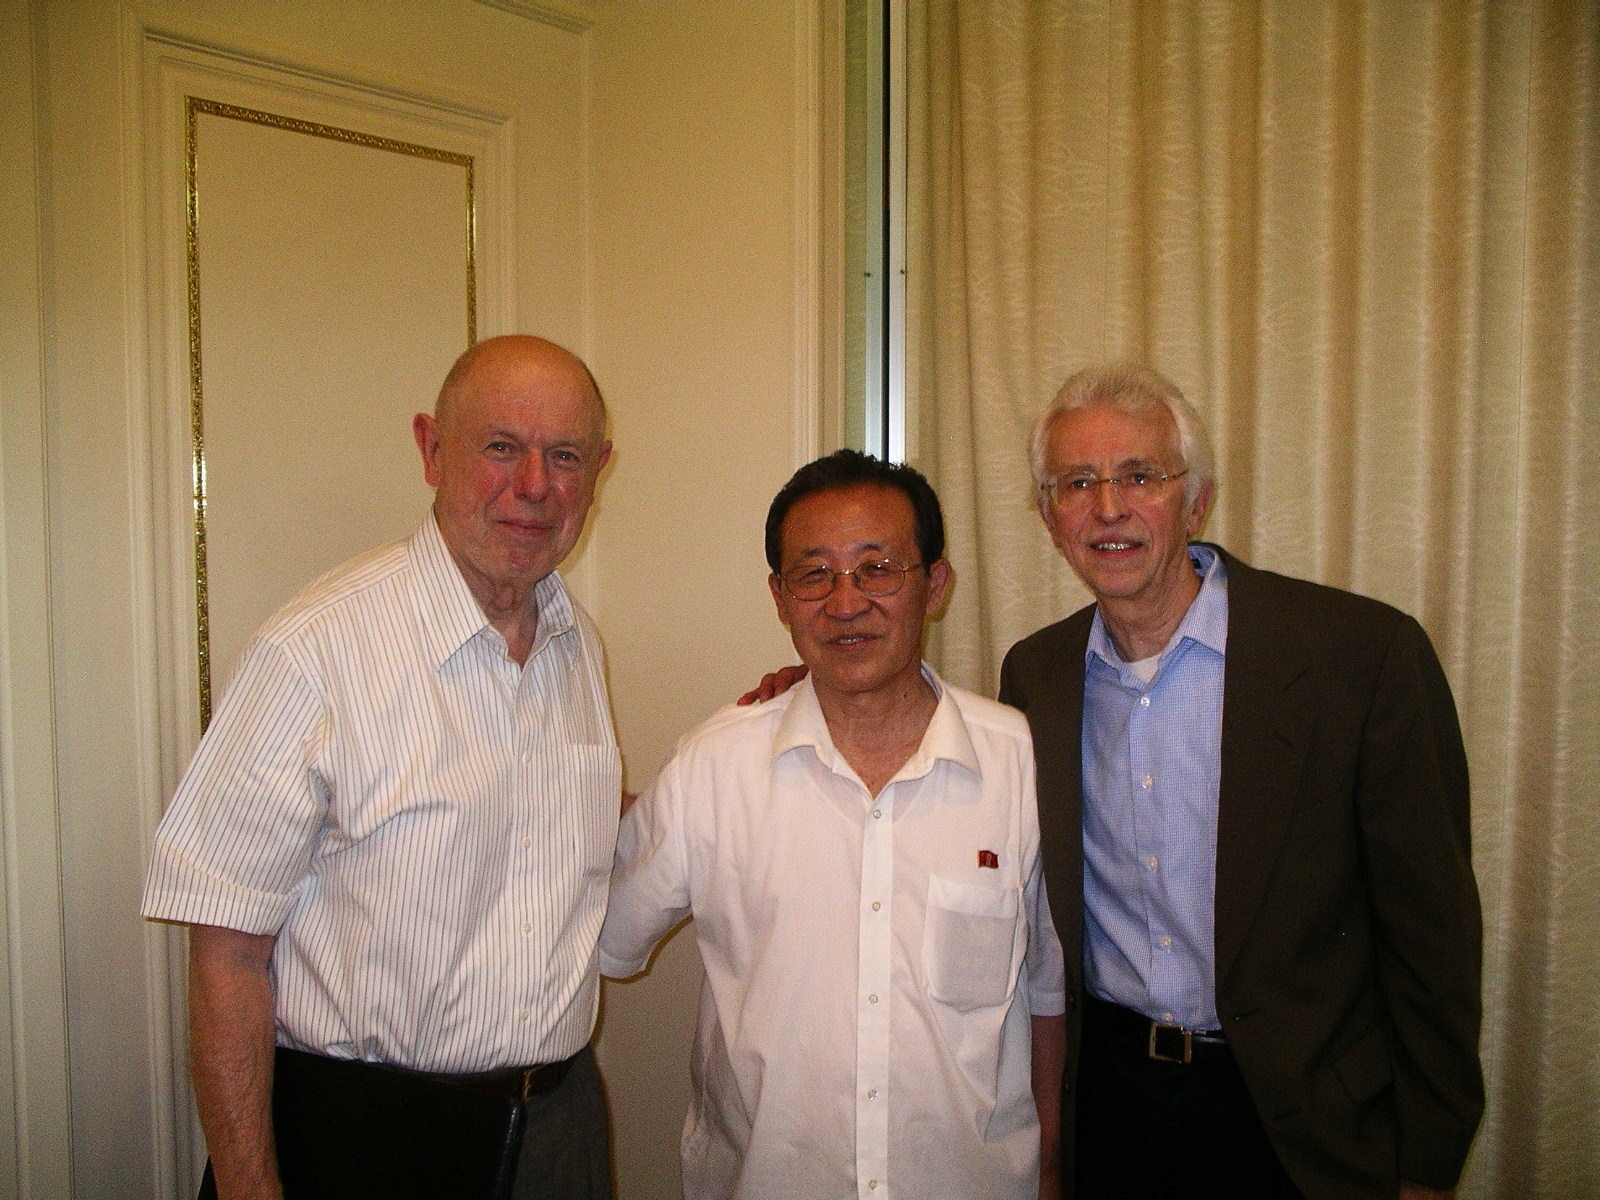 North Korean official flanked by two American men (Lewis and Hecker) posing for a photo